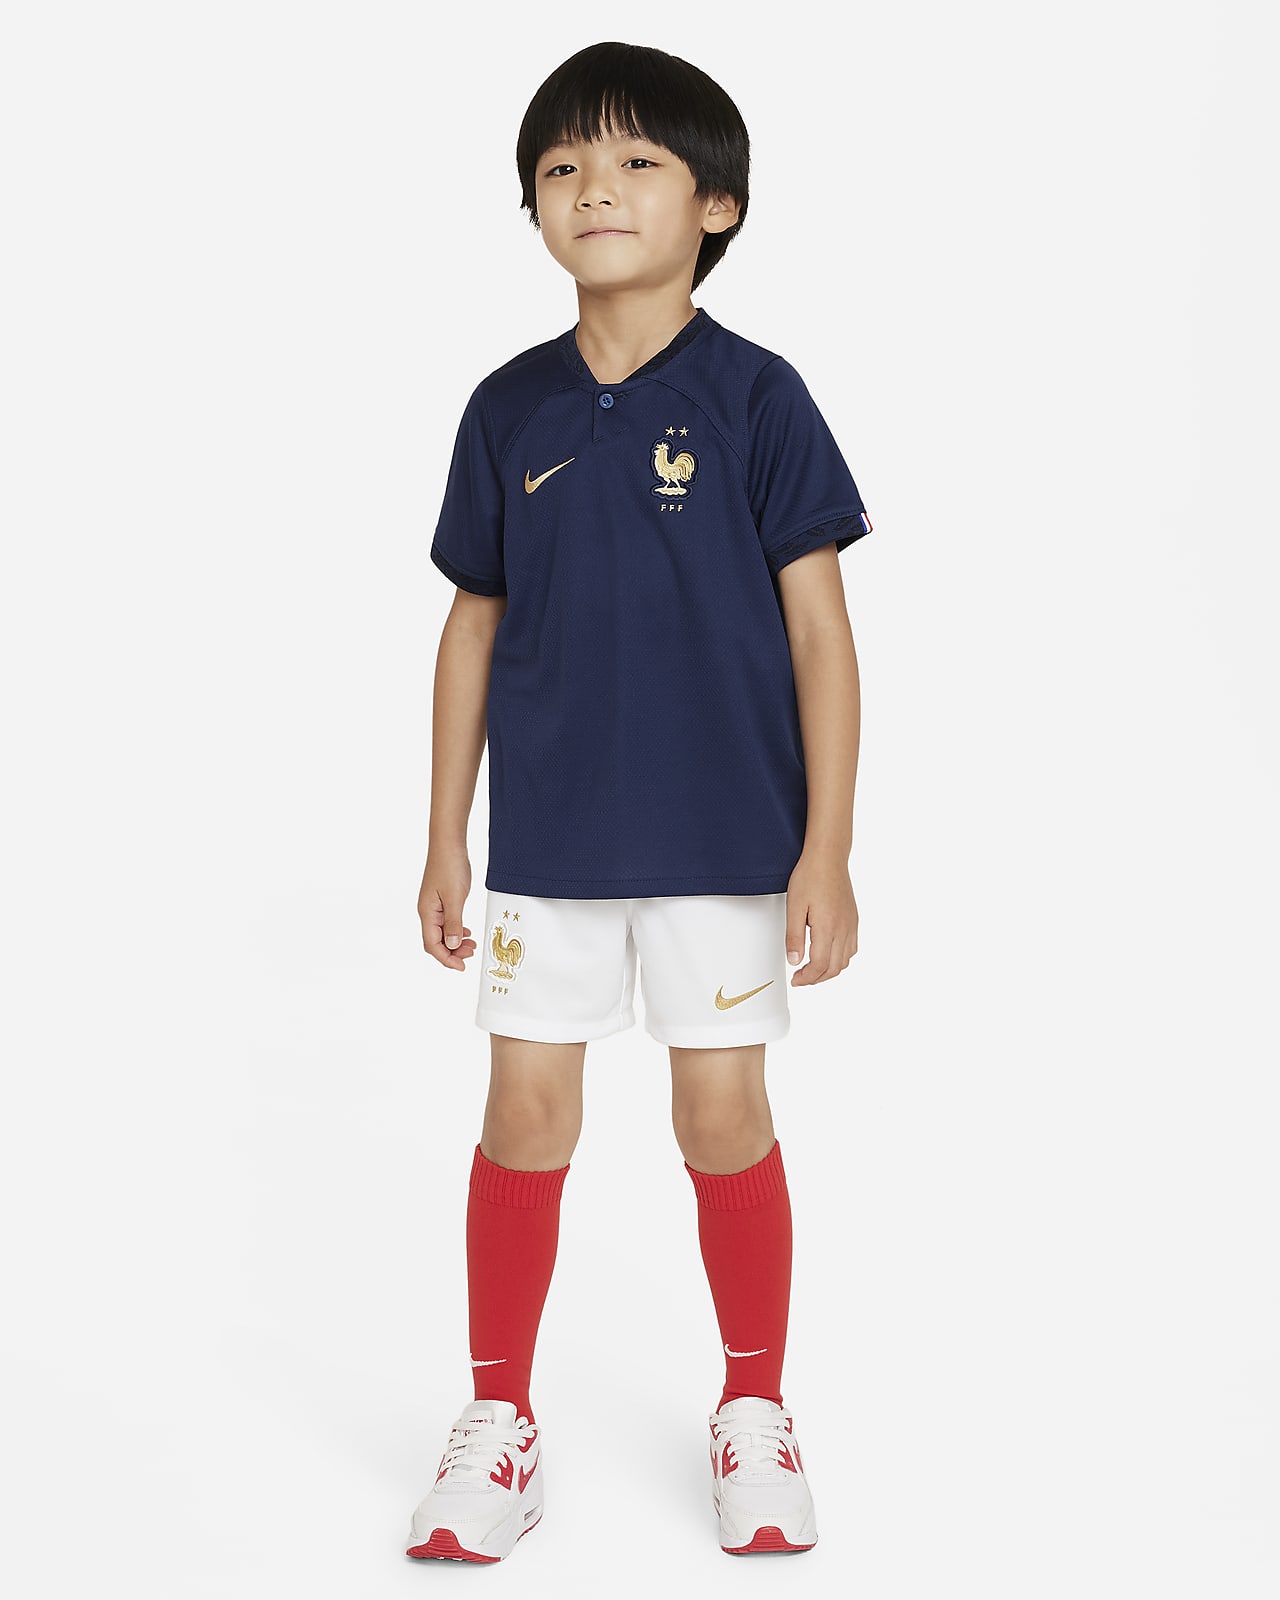 FFF 2022/23 Home Younger Kids' Nike Football Kit